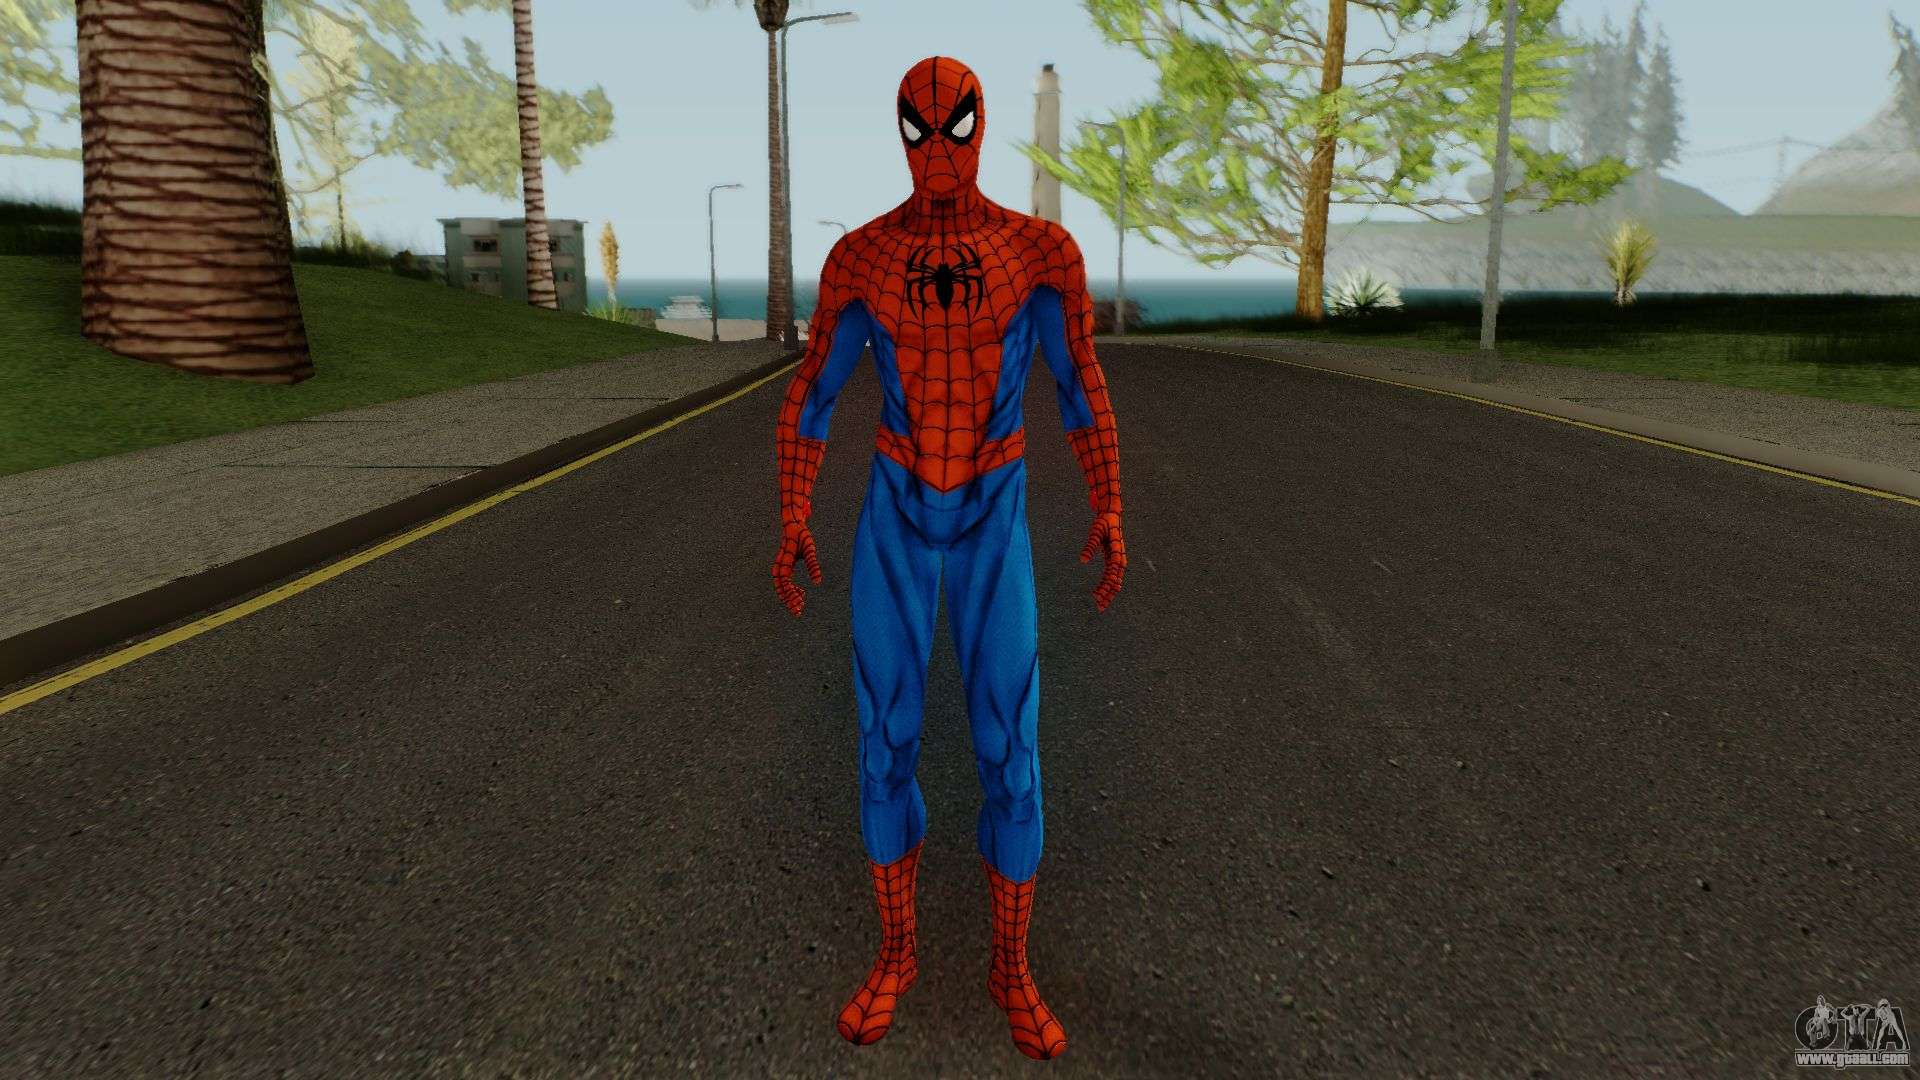 Spider-Man PS4 Classic Skin for GTA San Andreas